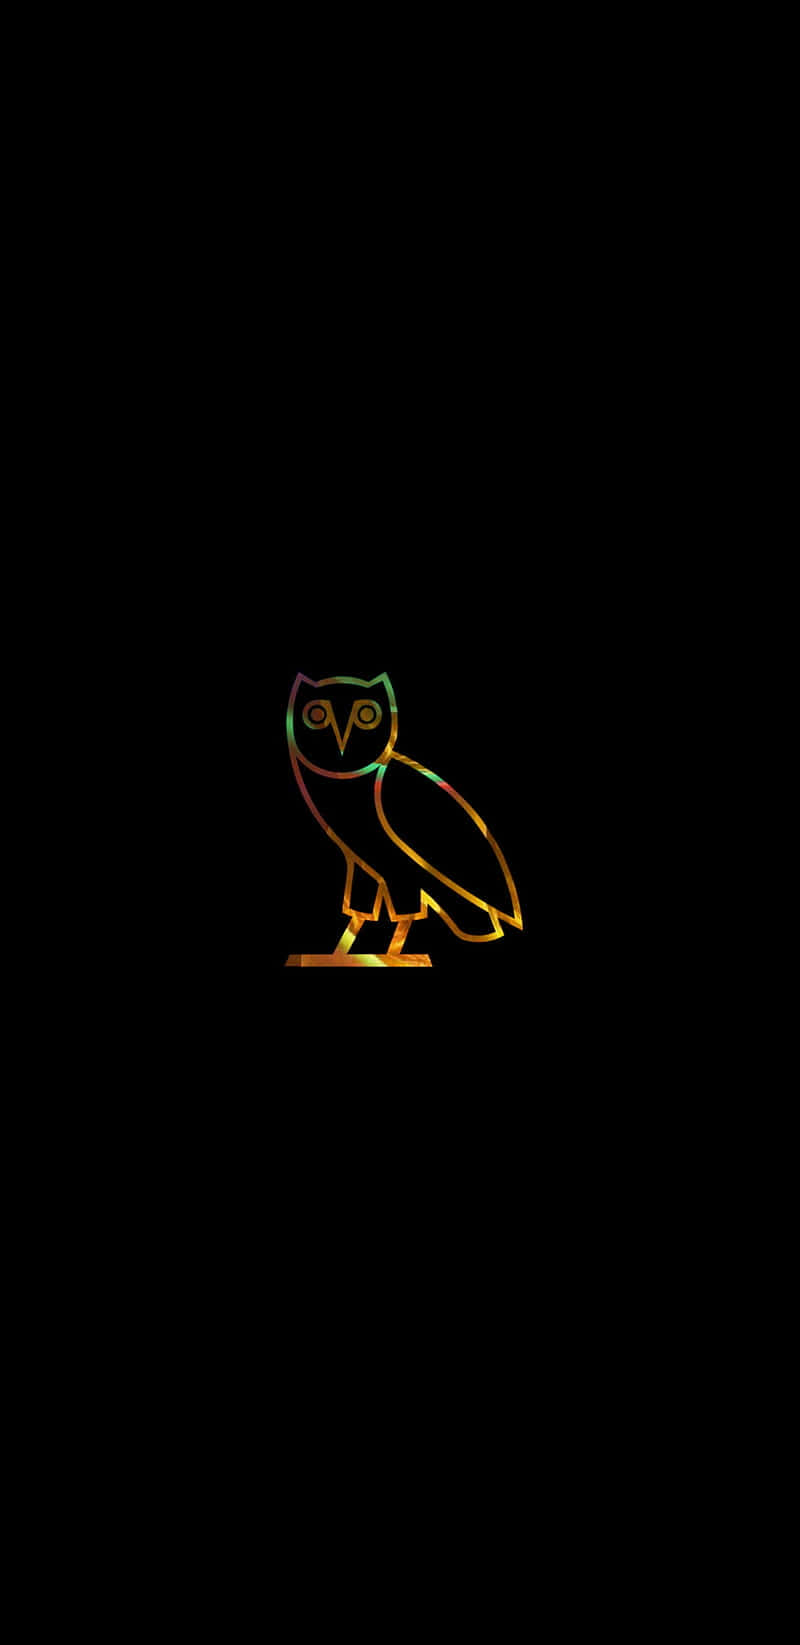 Drake Ovo Owl iPhone - High Definition Quality Wallpaper Wallpaper